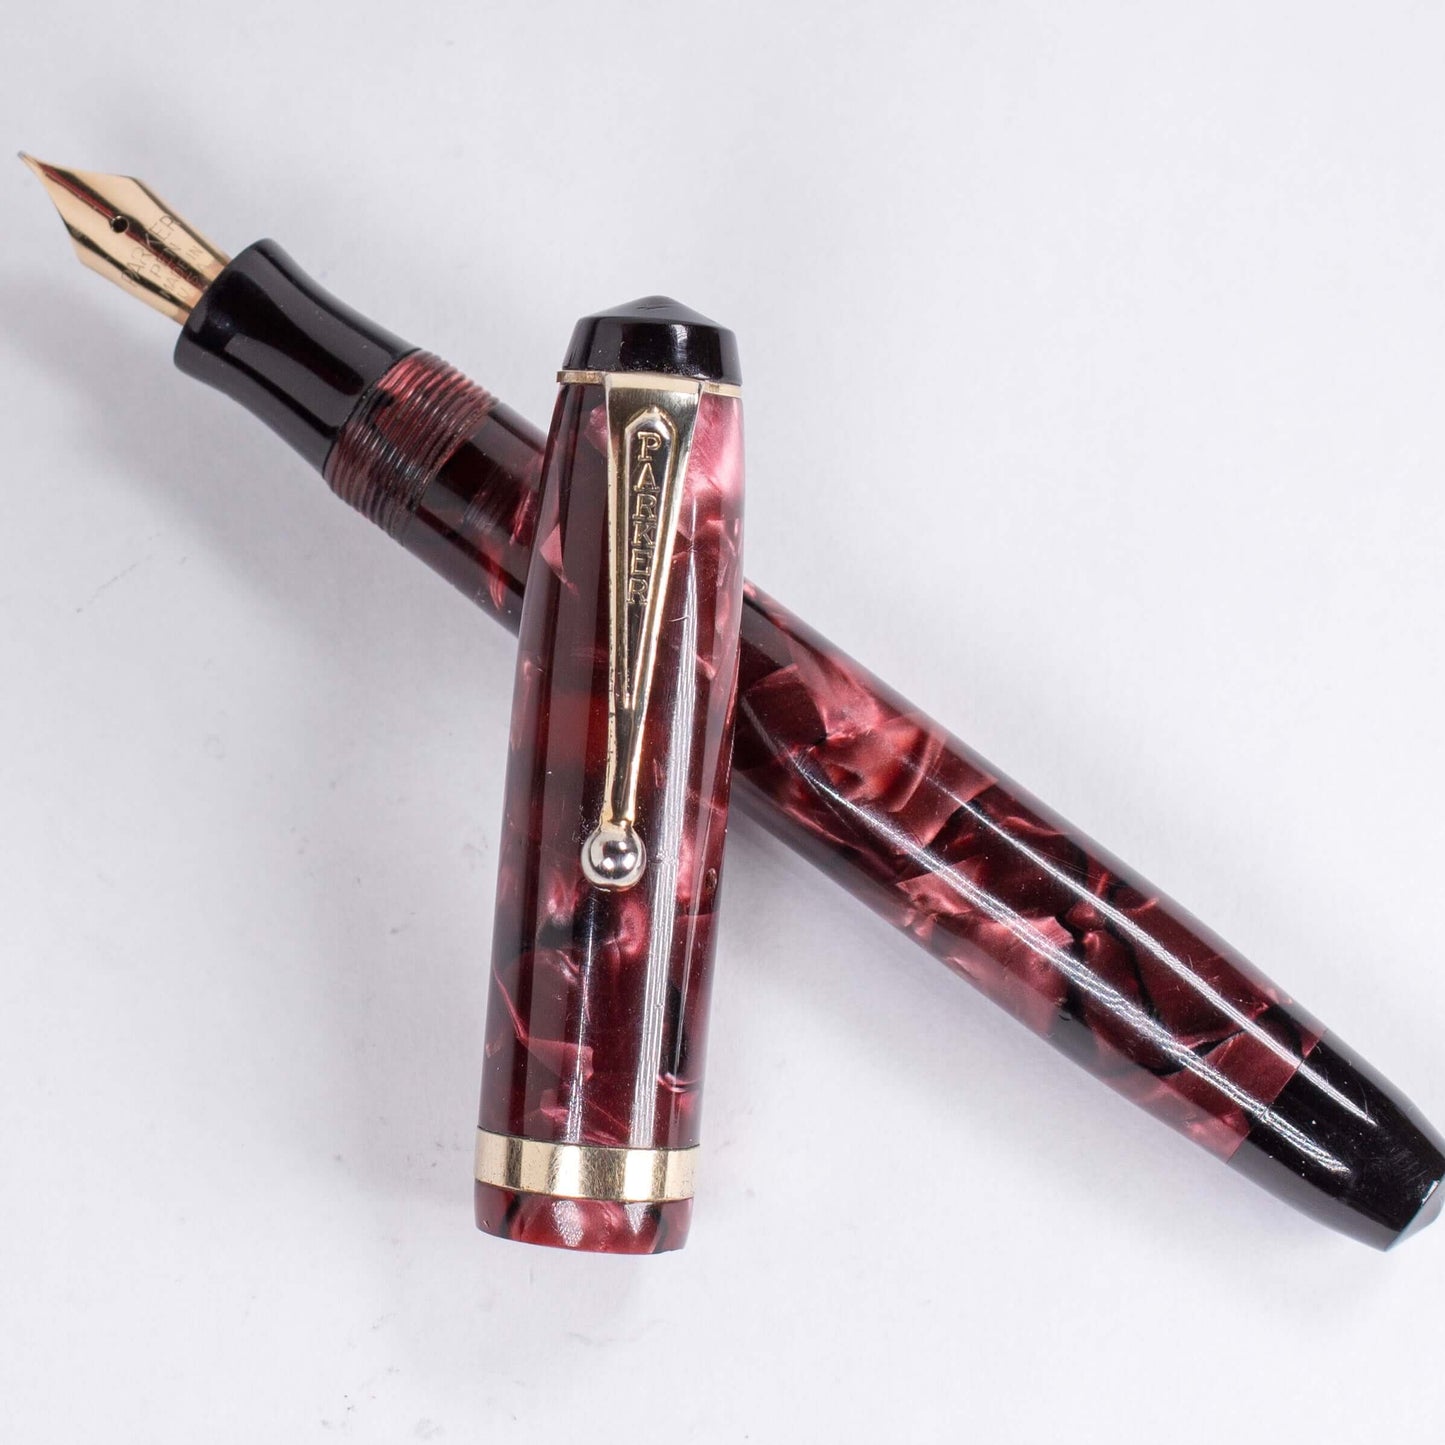 Parker Challenger Fountain Pen, Red Marbled, Button Filler, 14K Gold Nib Name/Type: Parker Challenger Restored Vintage Fountain Pen Manufacture Year: 1930s Length: 5 Filling System: Button Filler Color/Pattern: Red Marbled, Gold filled trim and cap band N